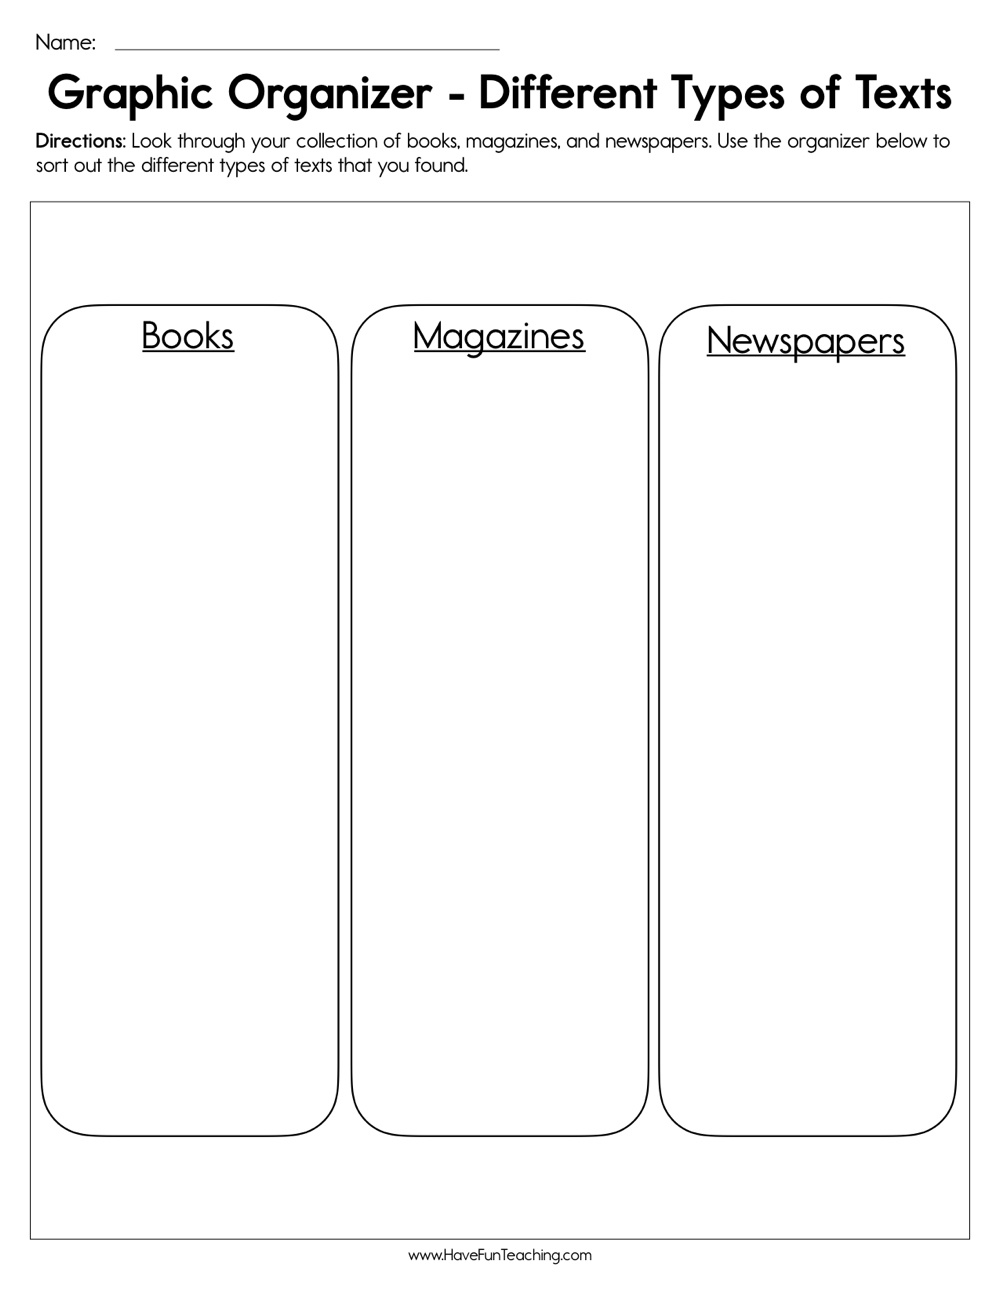 Resources | Have Fun Teaching - Free Printable Compare And Contrast Graphic Organizer